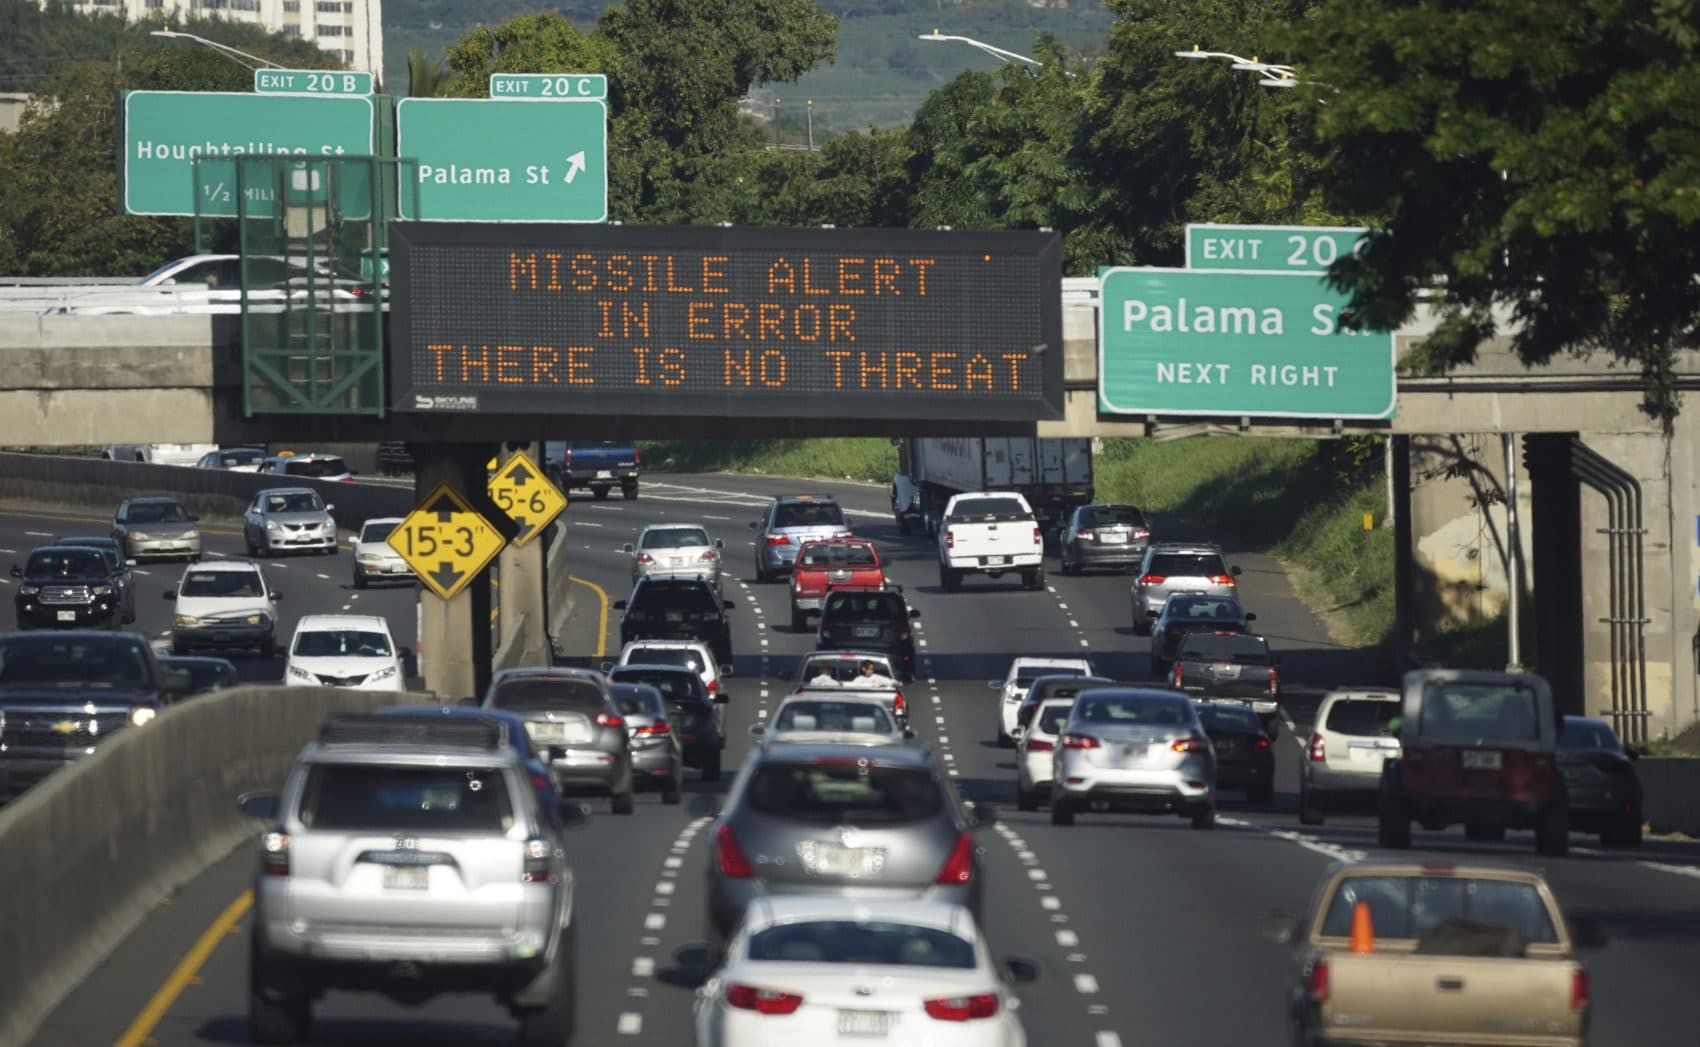 Cars drive past a highway sign Saturday in Honolulu, Hawaii alerting drivers that, contrary to an alert, there was no ballistic missile threat to the state. (Anthony Quintano/Civil Beat via AP)